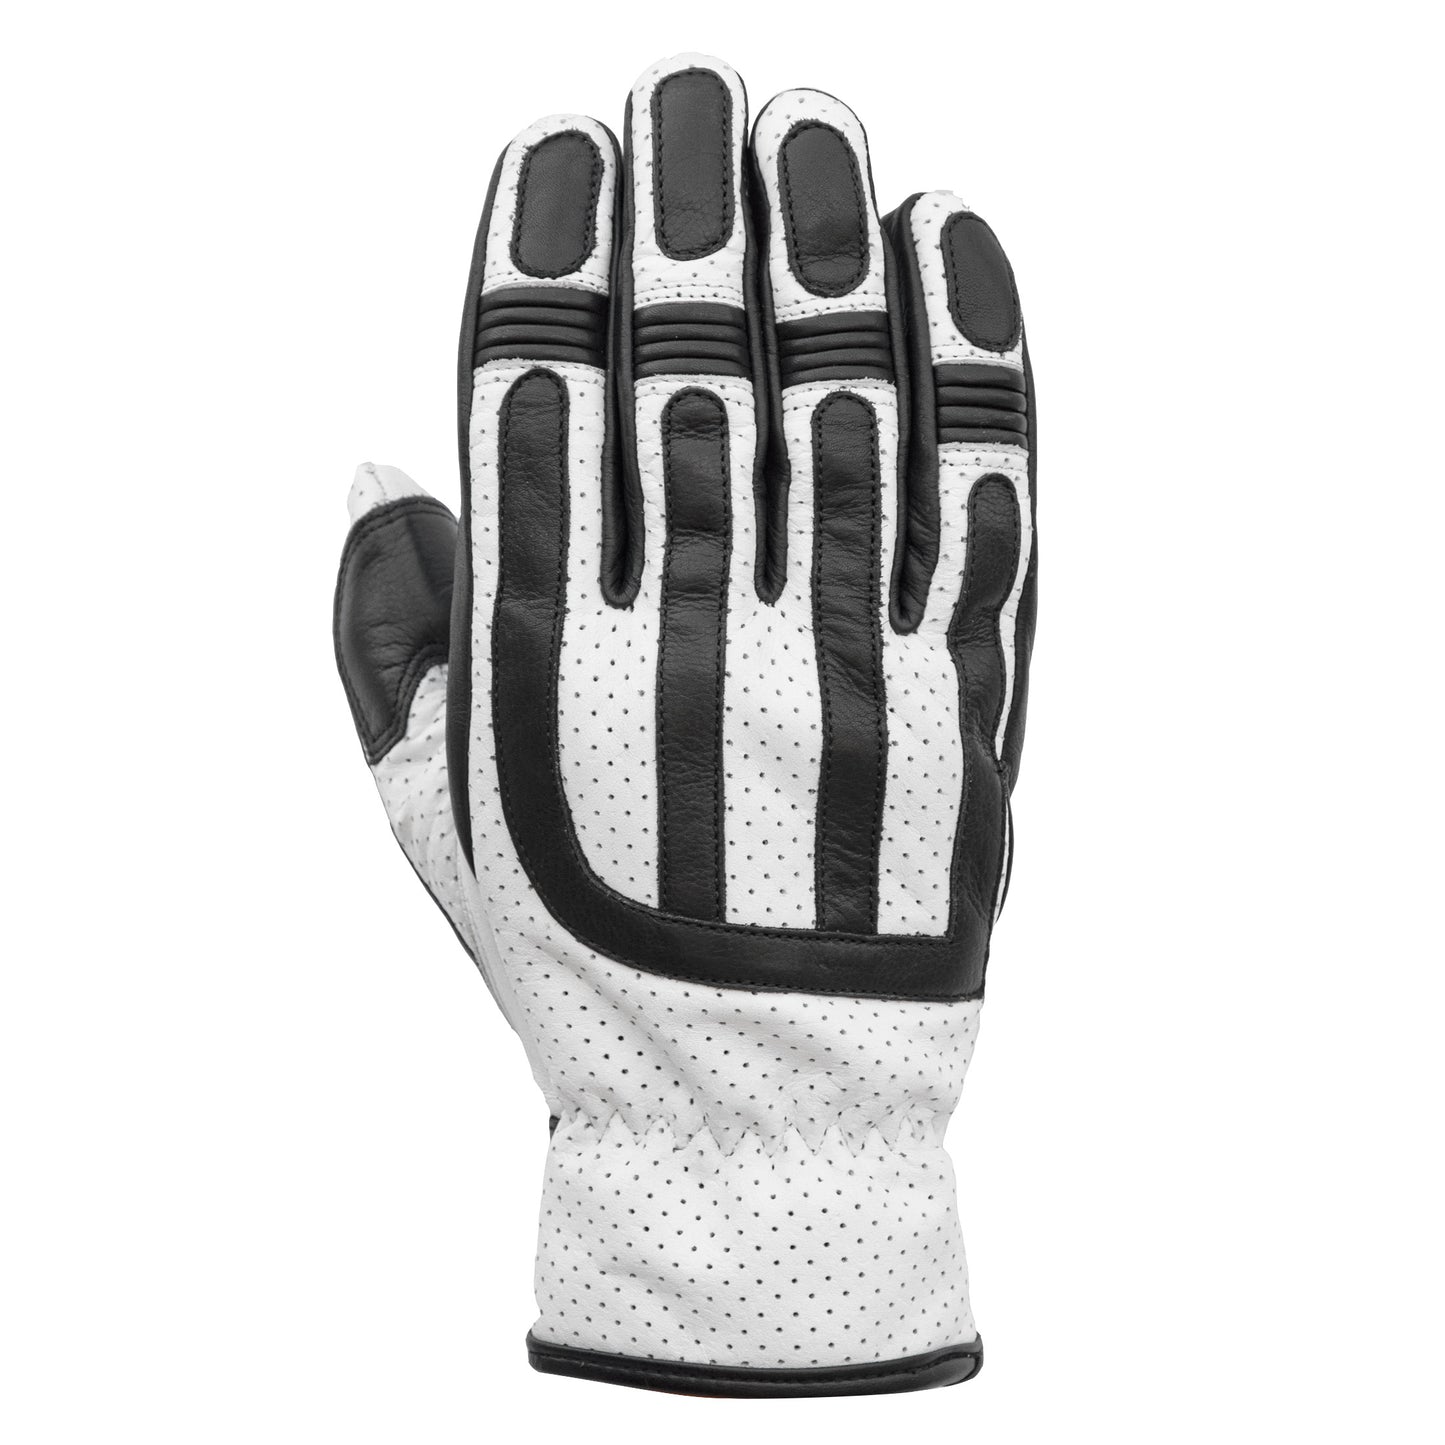 Age of Glory Victory Leather CE Gloves - Black/White